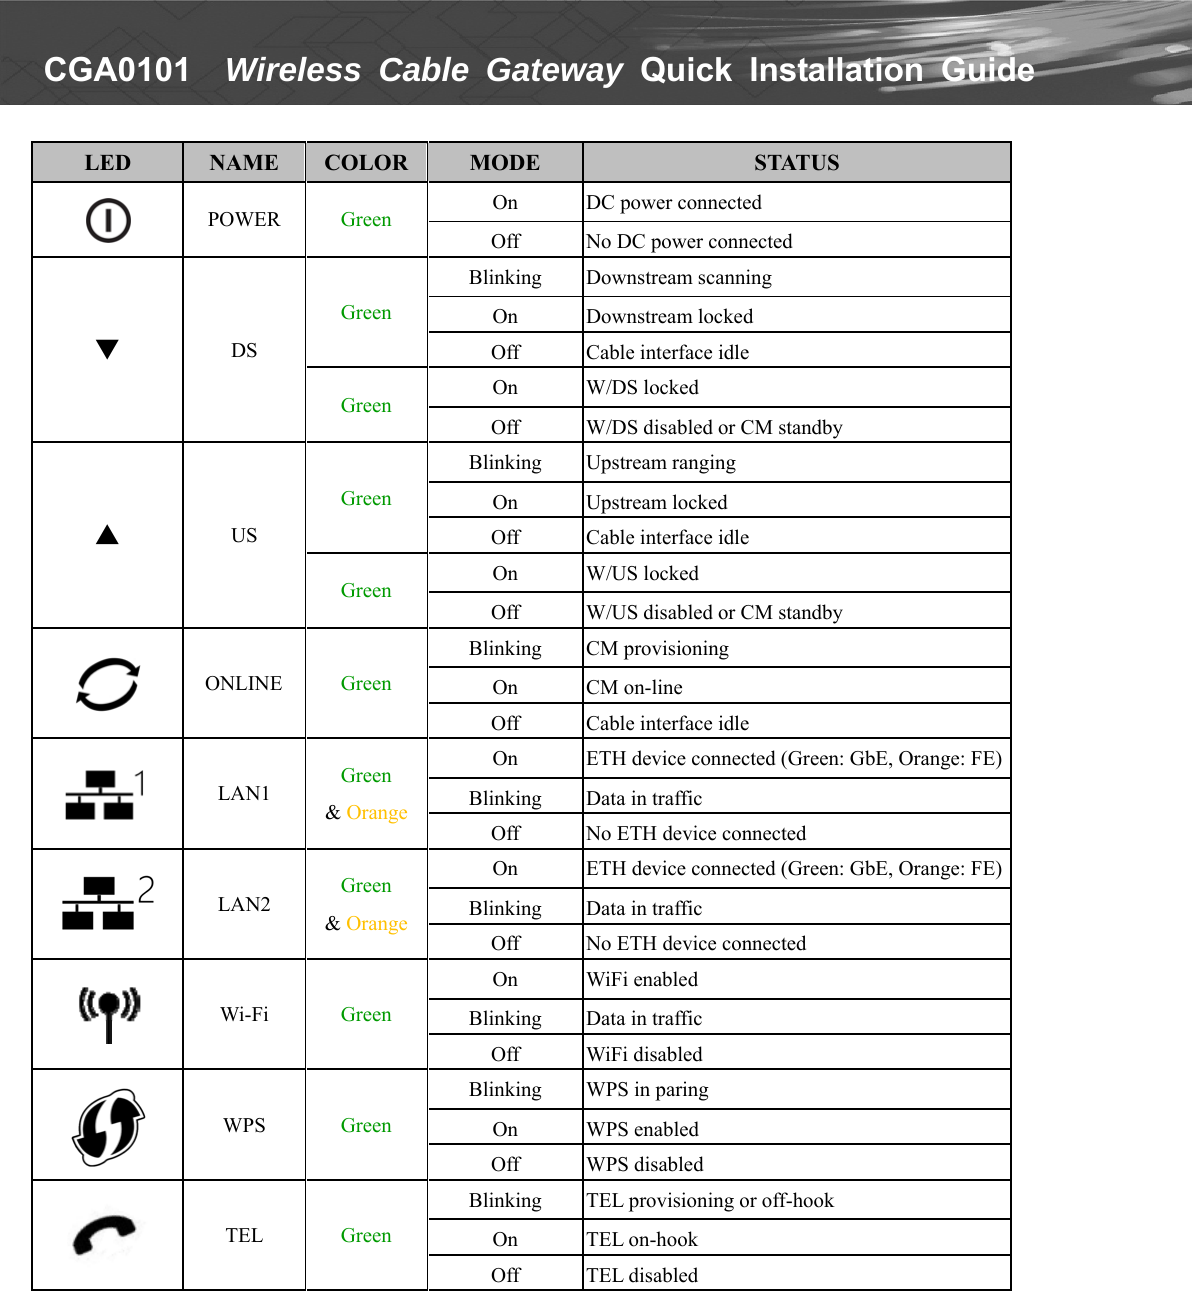   CGA0101    Wireless Cable Gateway Quick  Installation  Guide   LEDNAMECOLORMODESTATUSPOWERGreenOnDC power connectedOffNo DC power connected▼DSGreen BlinkingDownstream scanningOnDownstream lockedOffCable interface idle  GreenOnW/DS lockedOffW/DS disabled or CM standby▲USGreen BlinkingUpstream rangingOnUpstream lockedOffCable interface idleGreenOnW/US lockedOffW/US disabled or CM standbyONLINEGreenBlinkingCM provisioningOnCM on-lineOffCable interface idle  LAN1Green&amp; OrangeOnETH device connected (Green: GbE, Orange: FE)BlinkingData in trafficOff  No ETH device connectedLAN2Green&amp; OrangeOnETH device connected (Green: GbE, Orange: FE)BlinkingData in trafficOff  No ETH device connectedWi-FiGreenOnWiFi enabled  BlinkingData in trafficOffWiFi disabled  WPSGreenBlinkingWPS in paringOnWPS enabledOffWPS disabledTELGreenBlinkingTEL provisioning or off-hook  OnTEL on-hookOffTEL disabled 